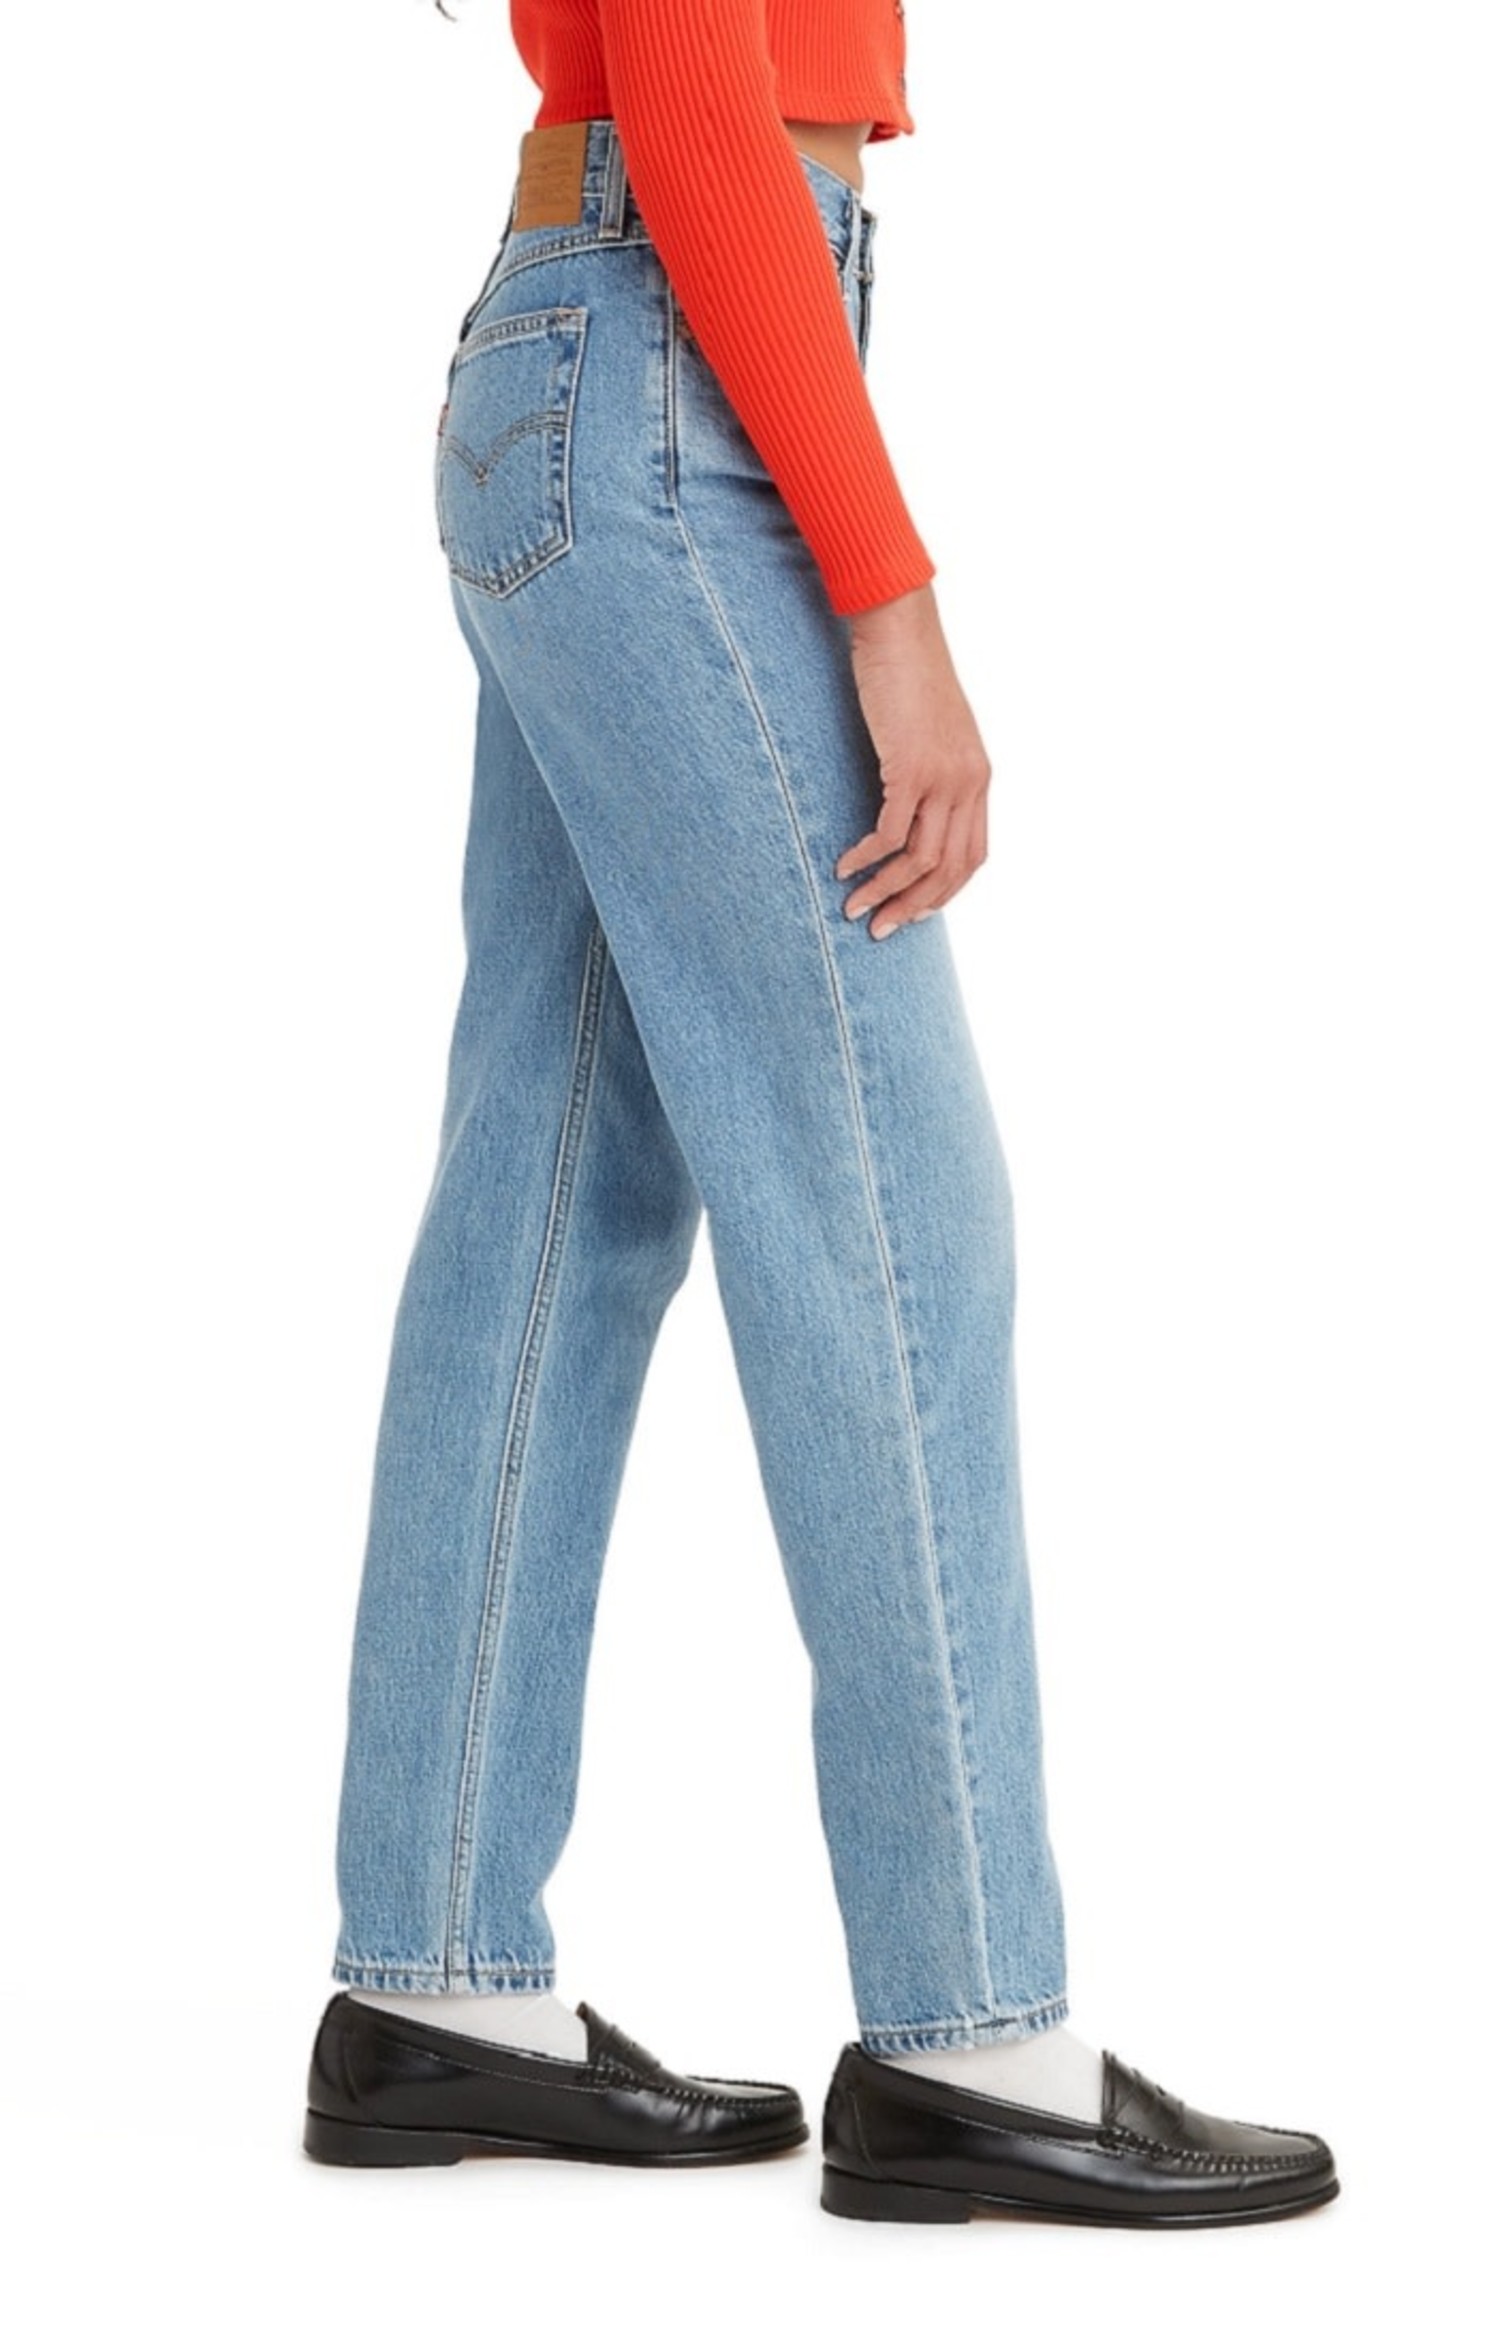 Levi's 80's Worn In Mom Jeans - High-Waisted Jeans - Medium Wash